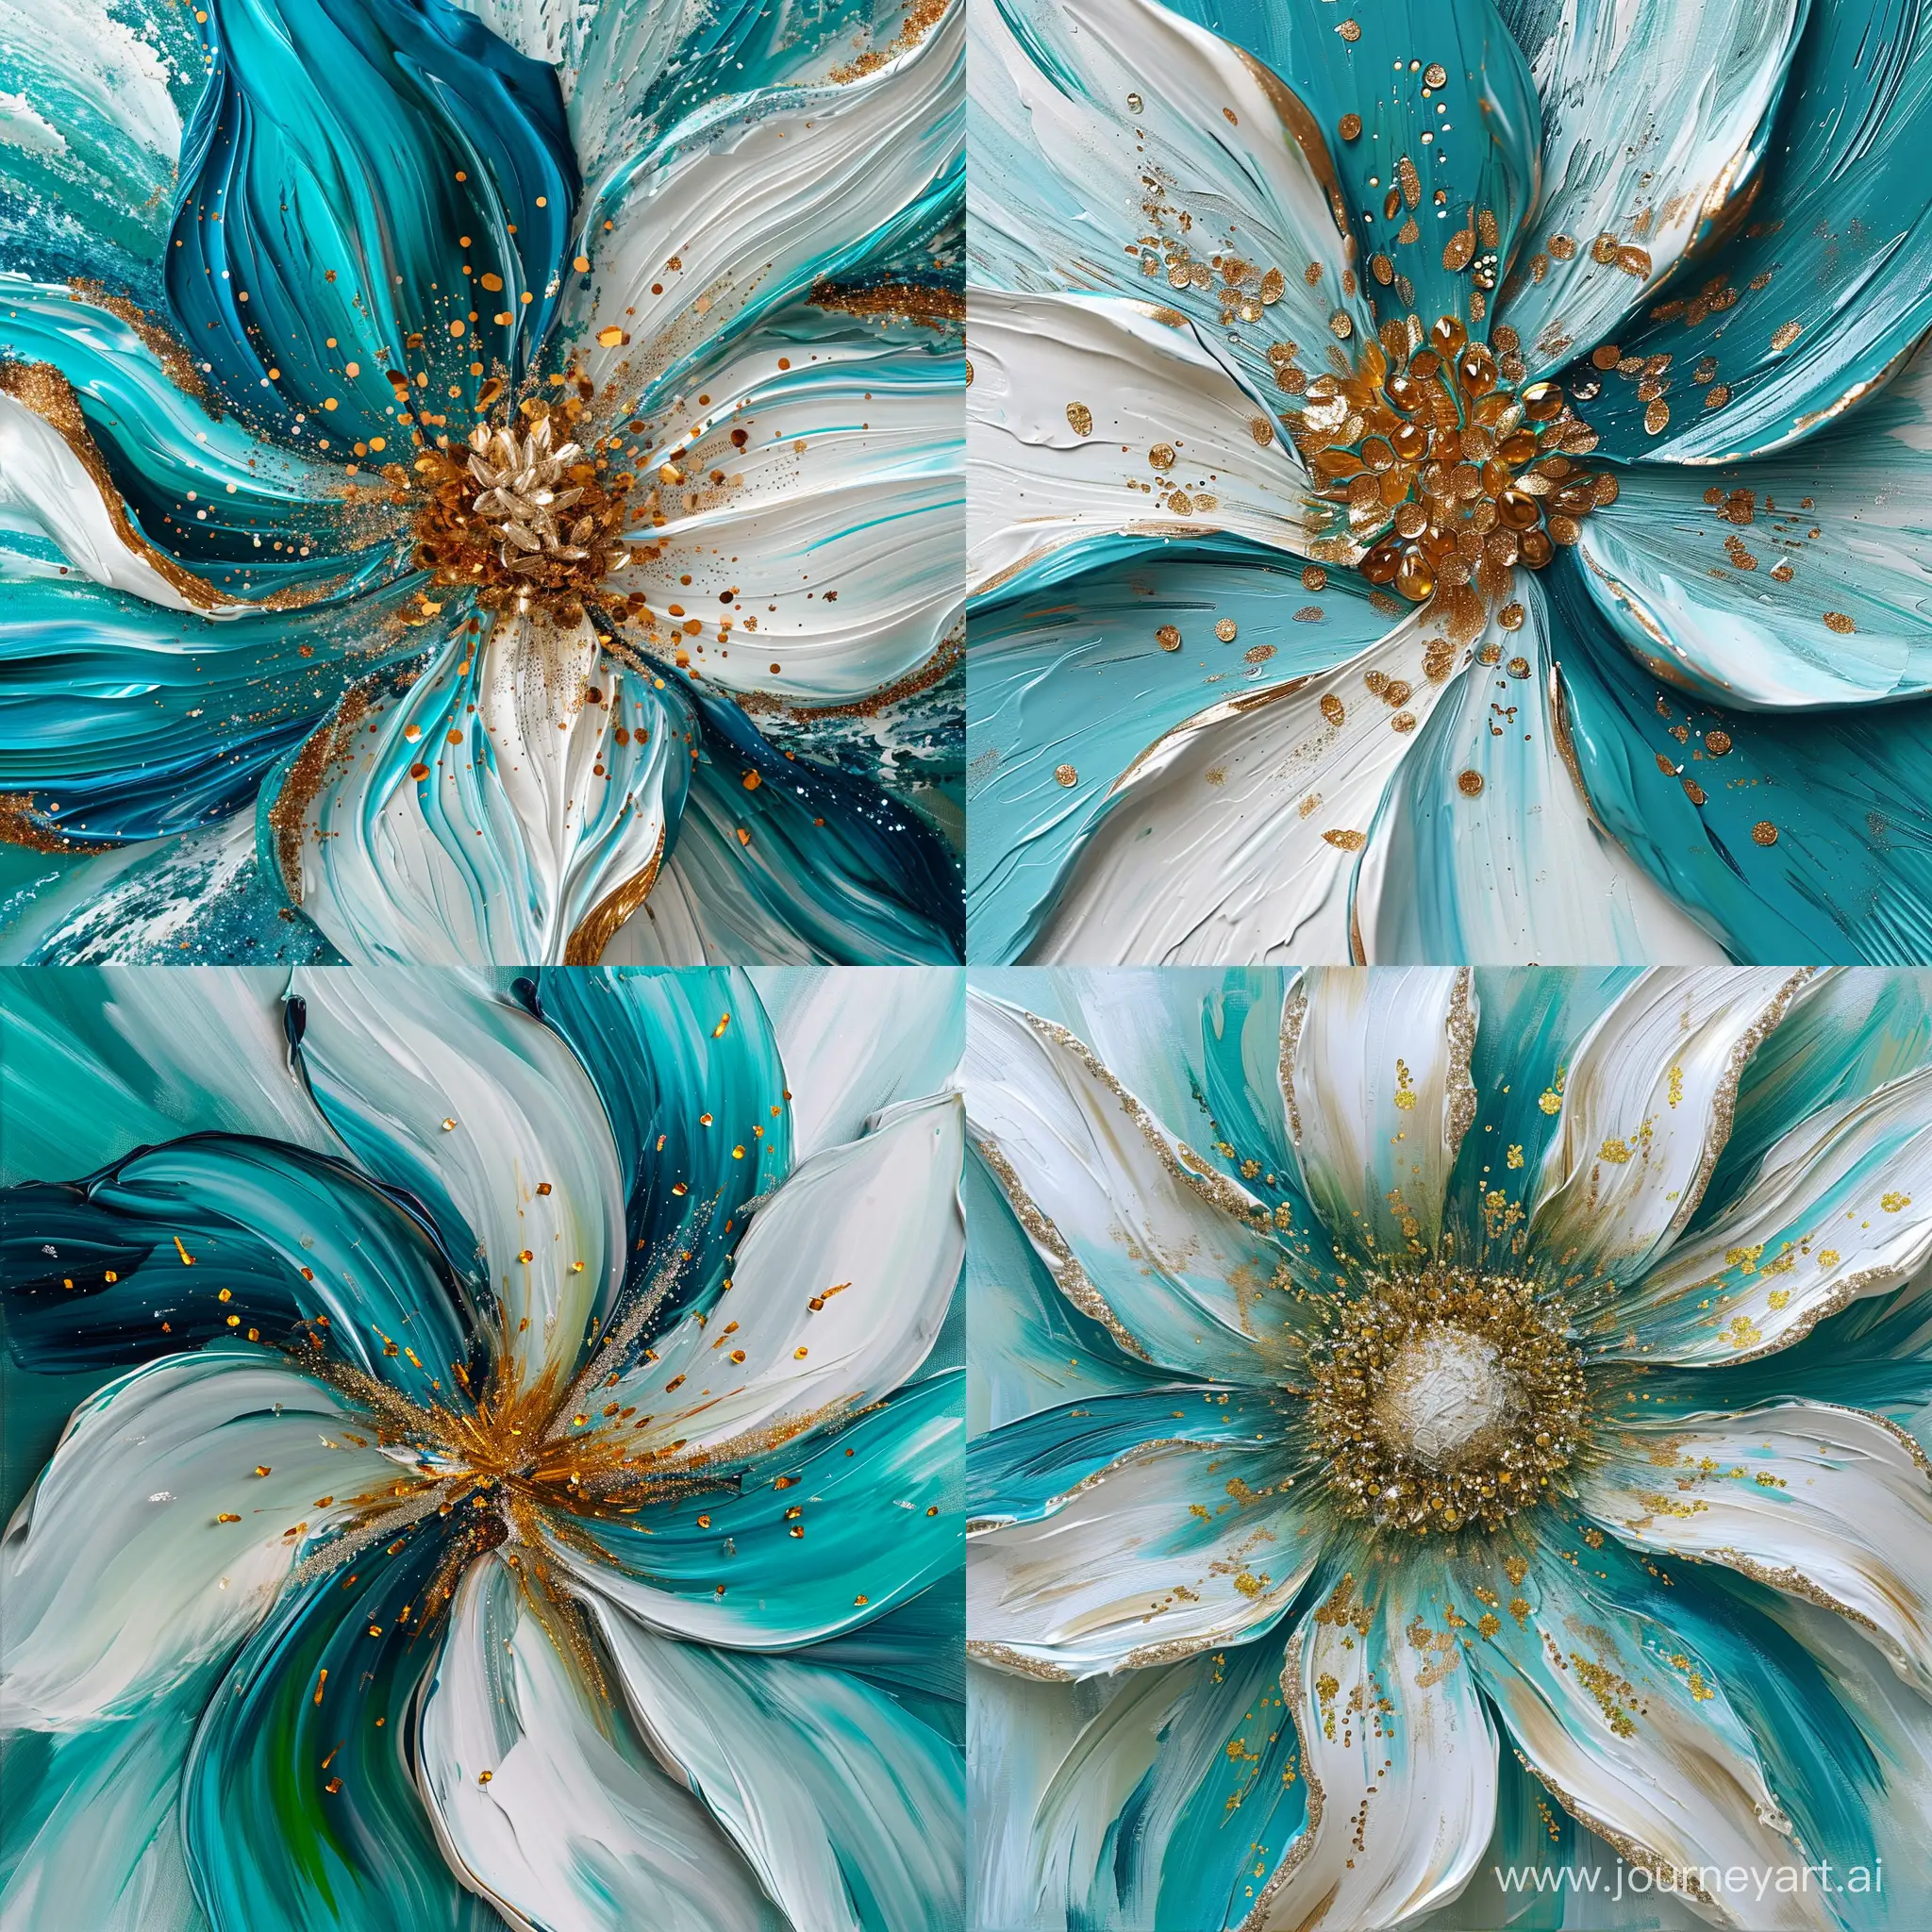 icon of Surreal flower made of oil paint, large strokes, turquoise and white, gold sequins , unlimited flow of energy, abstract, multidimensional